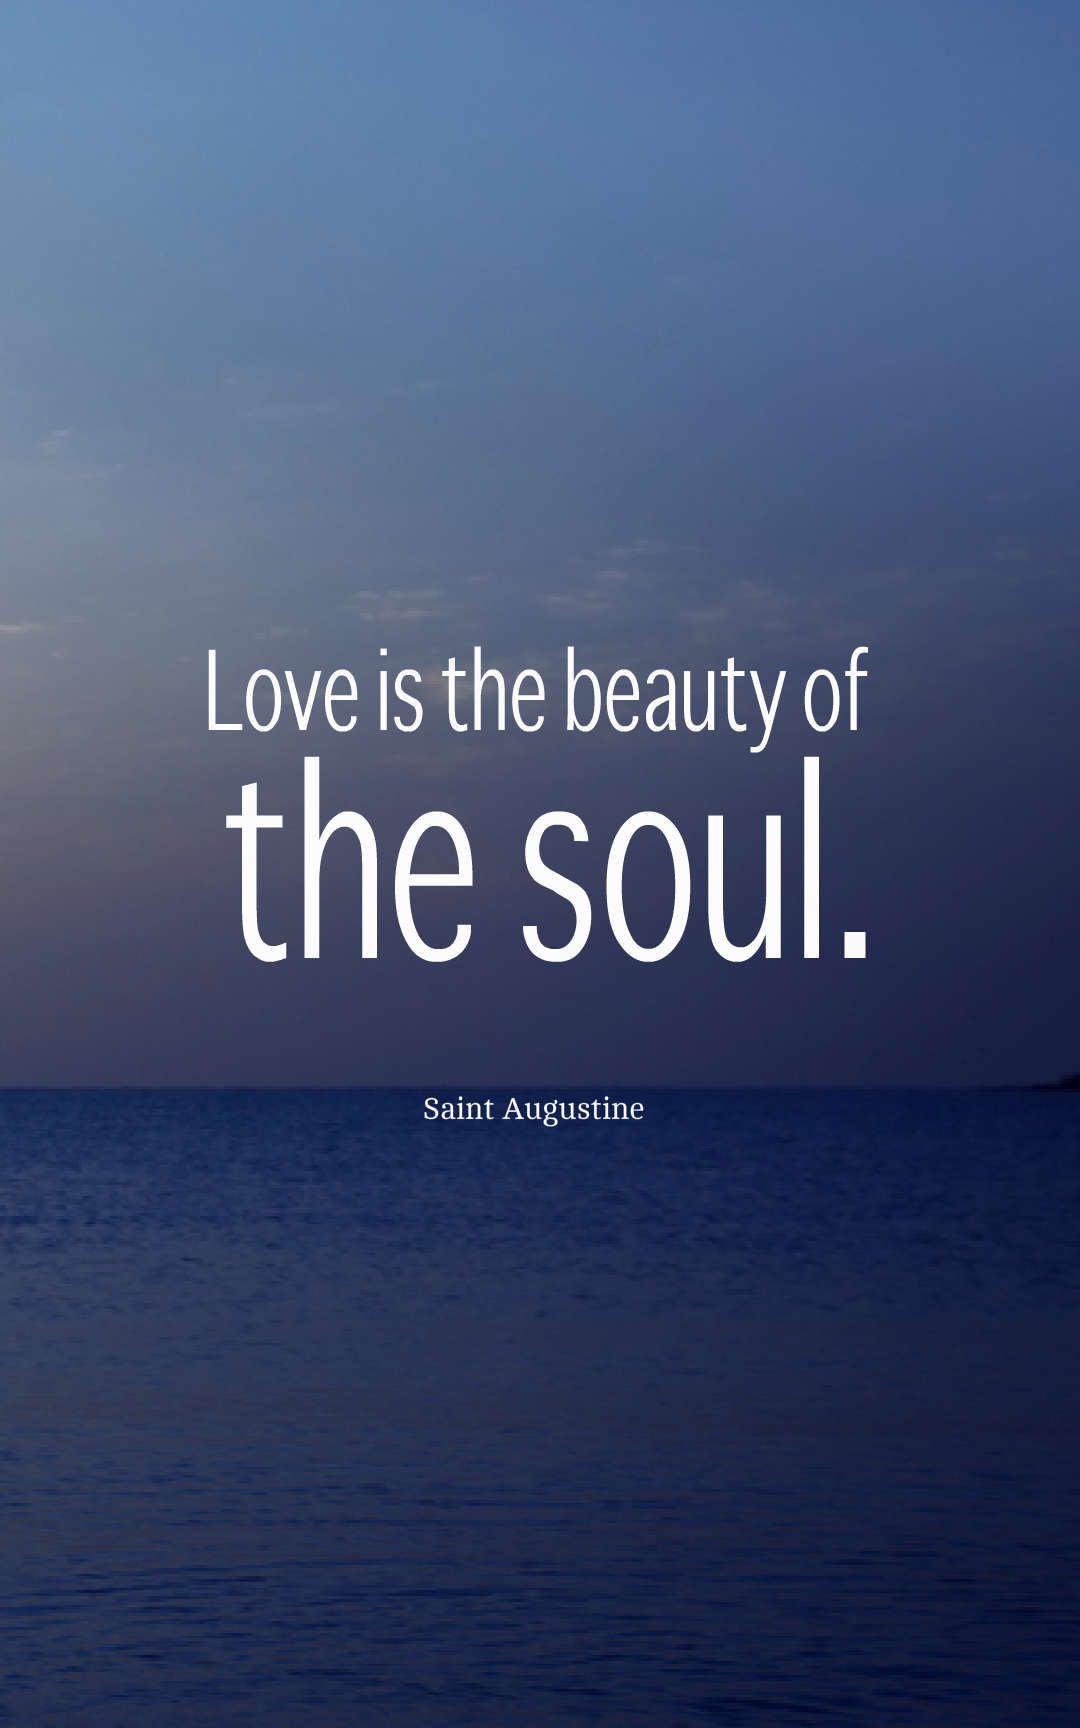 Love is the beauty of the soul.